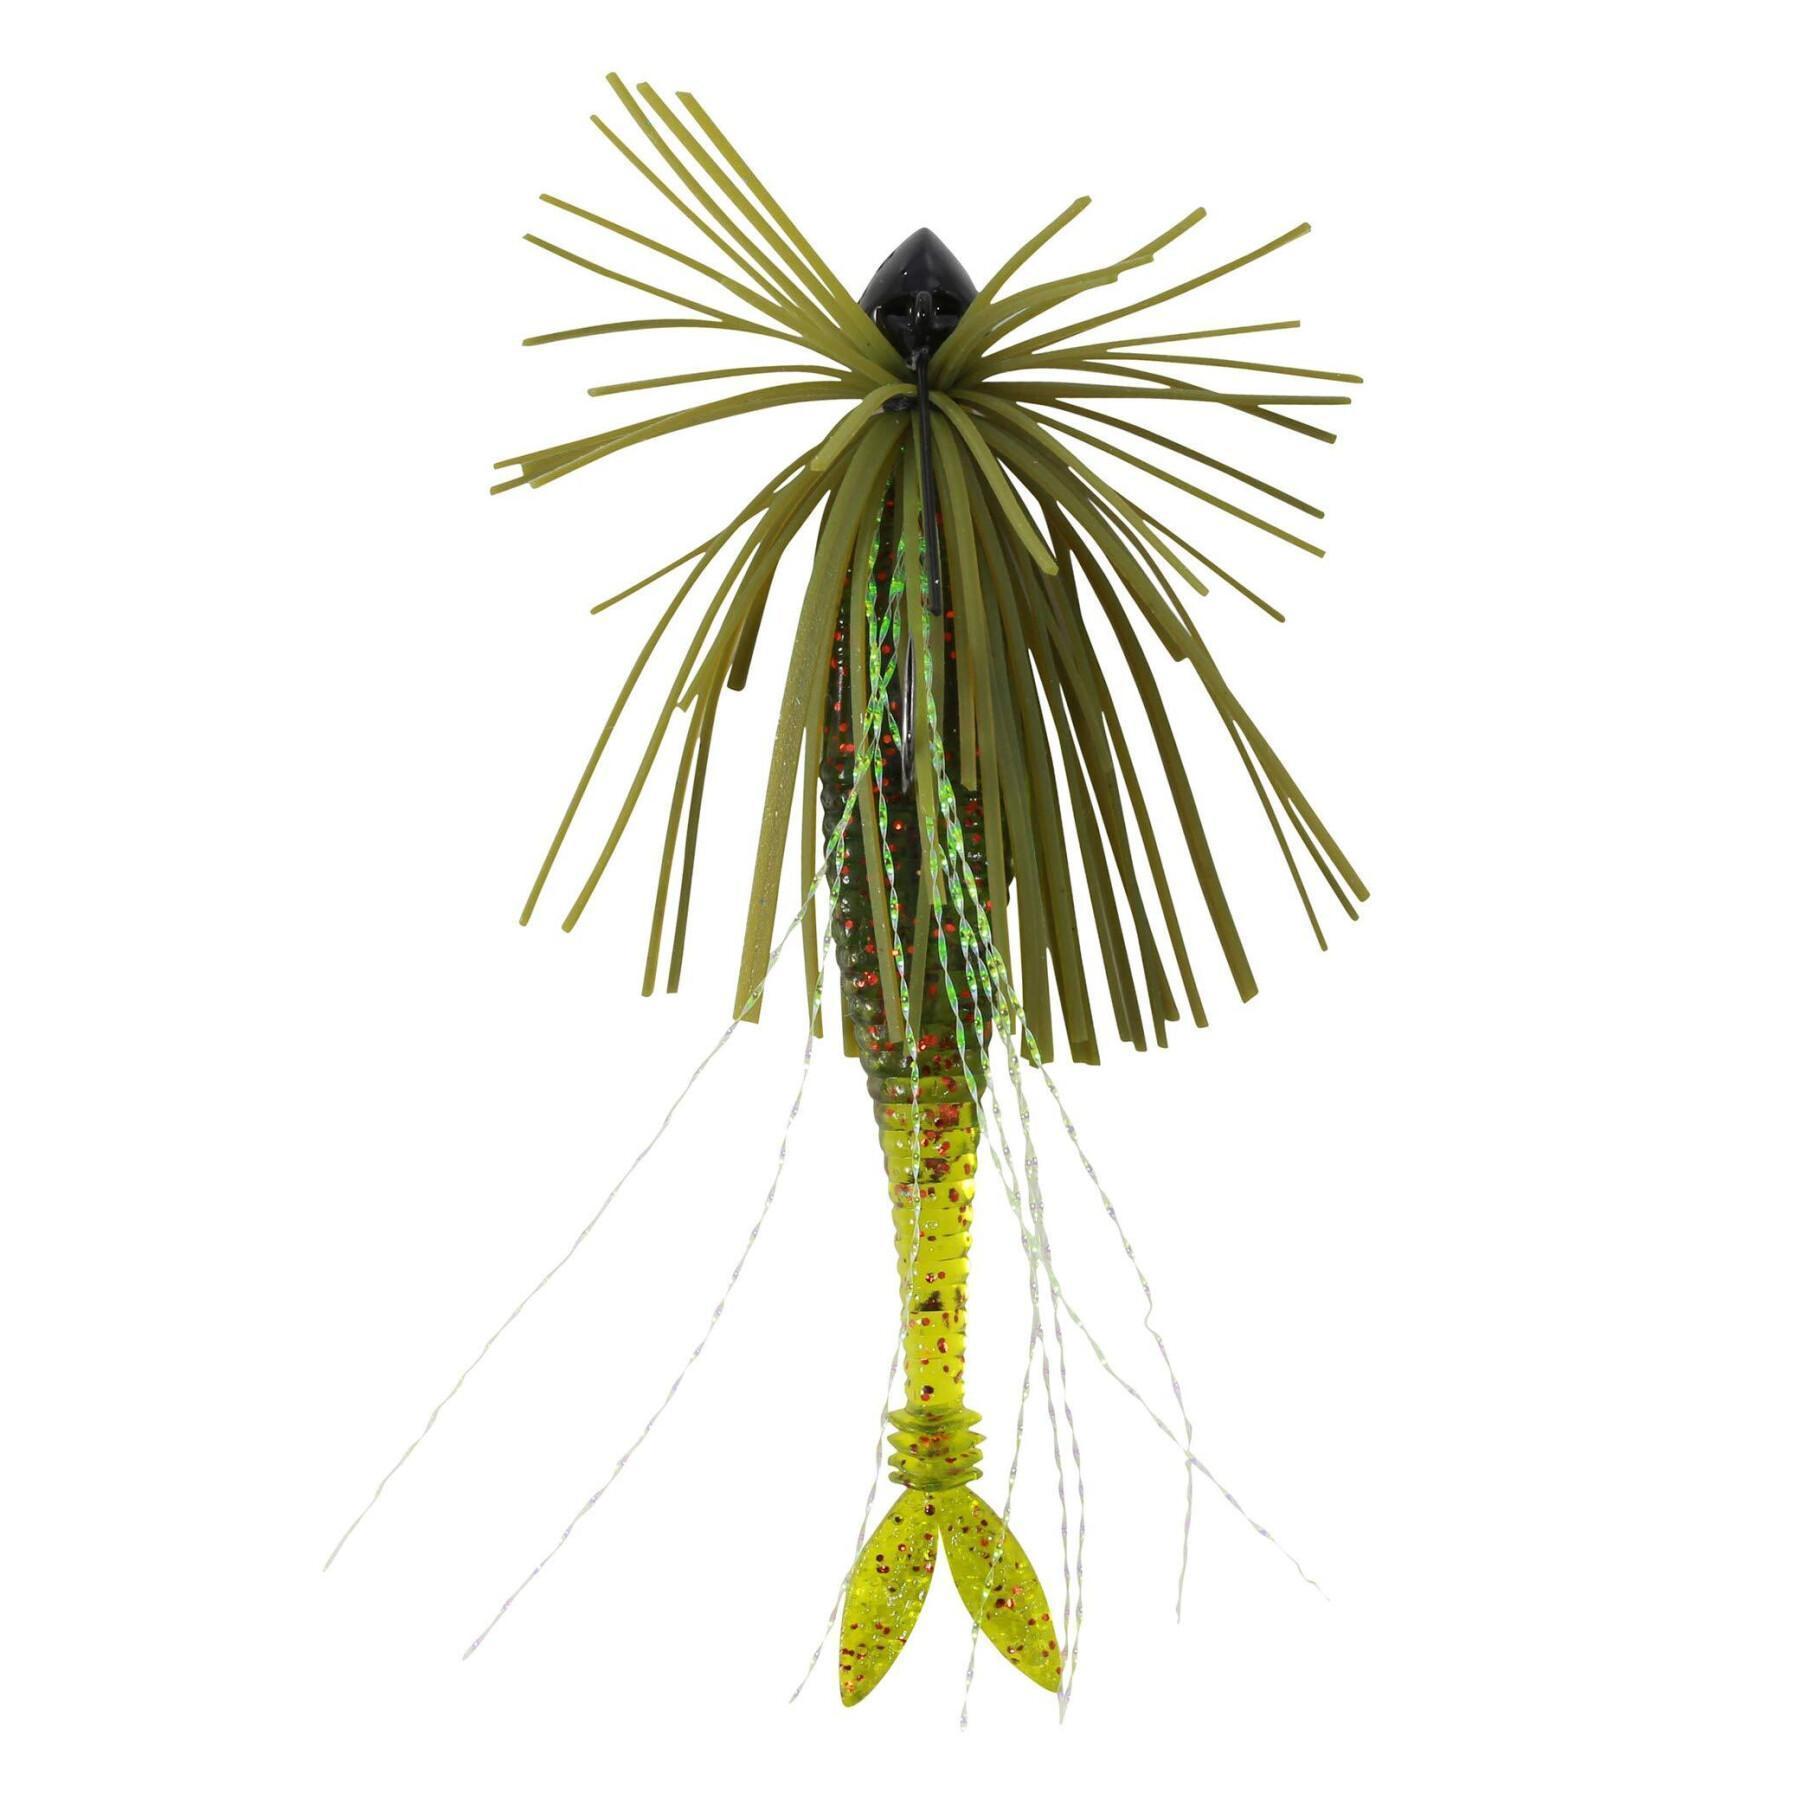 Lure Duo Small Rubber Realis Jig 5g